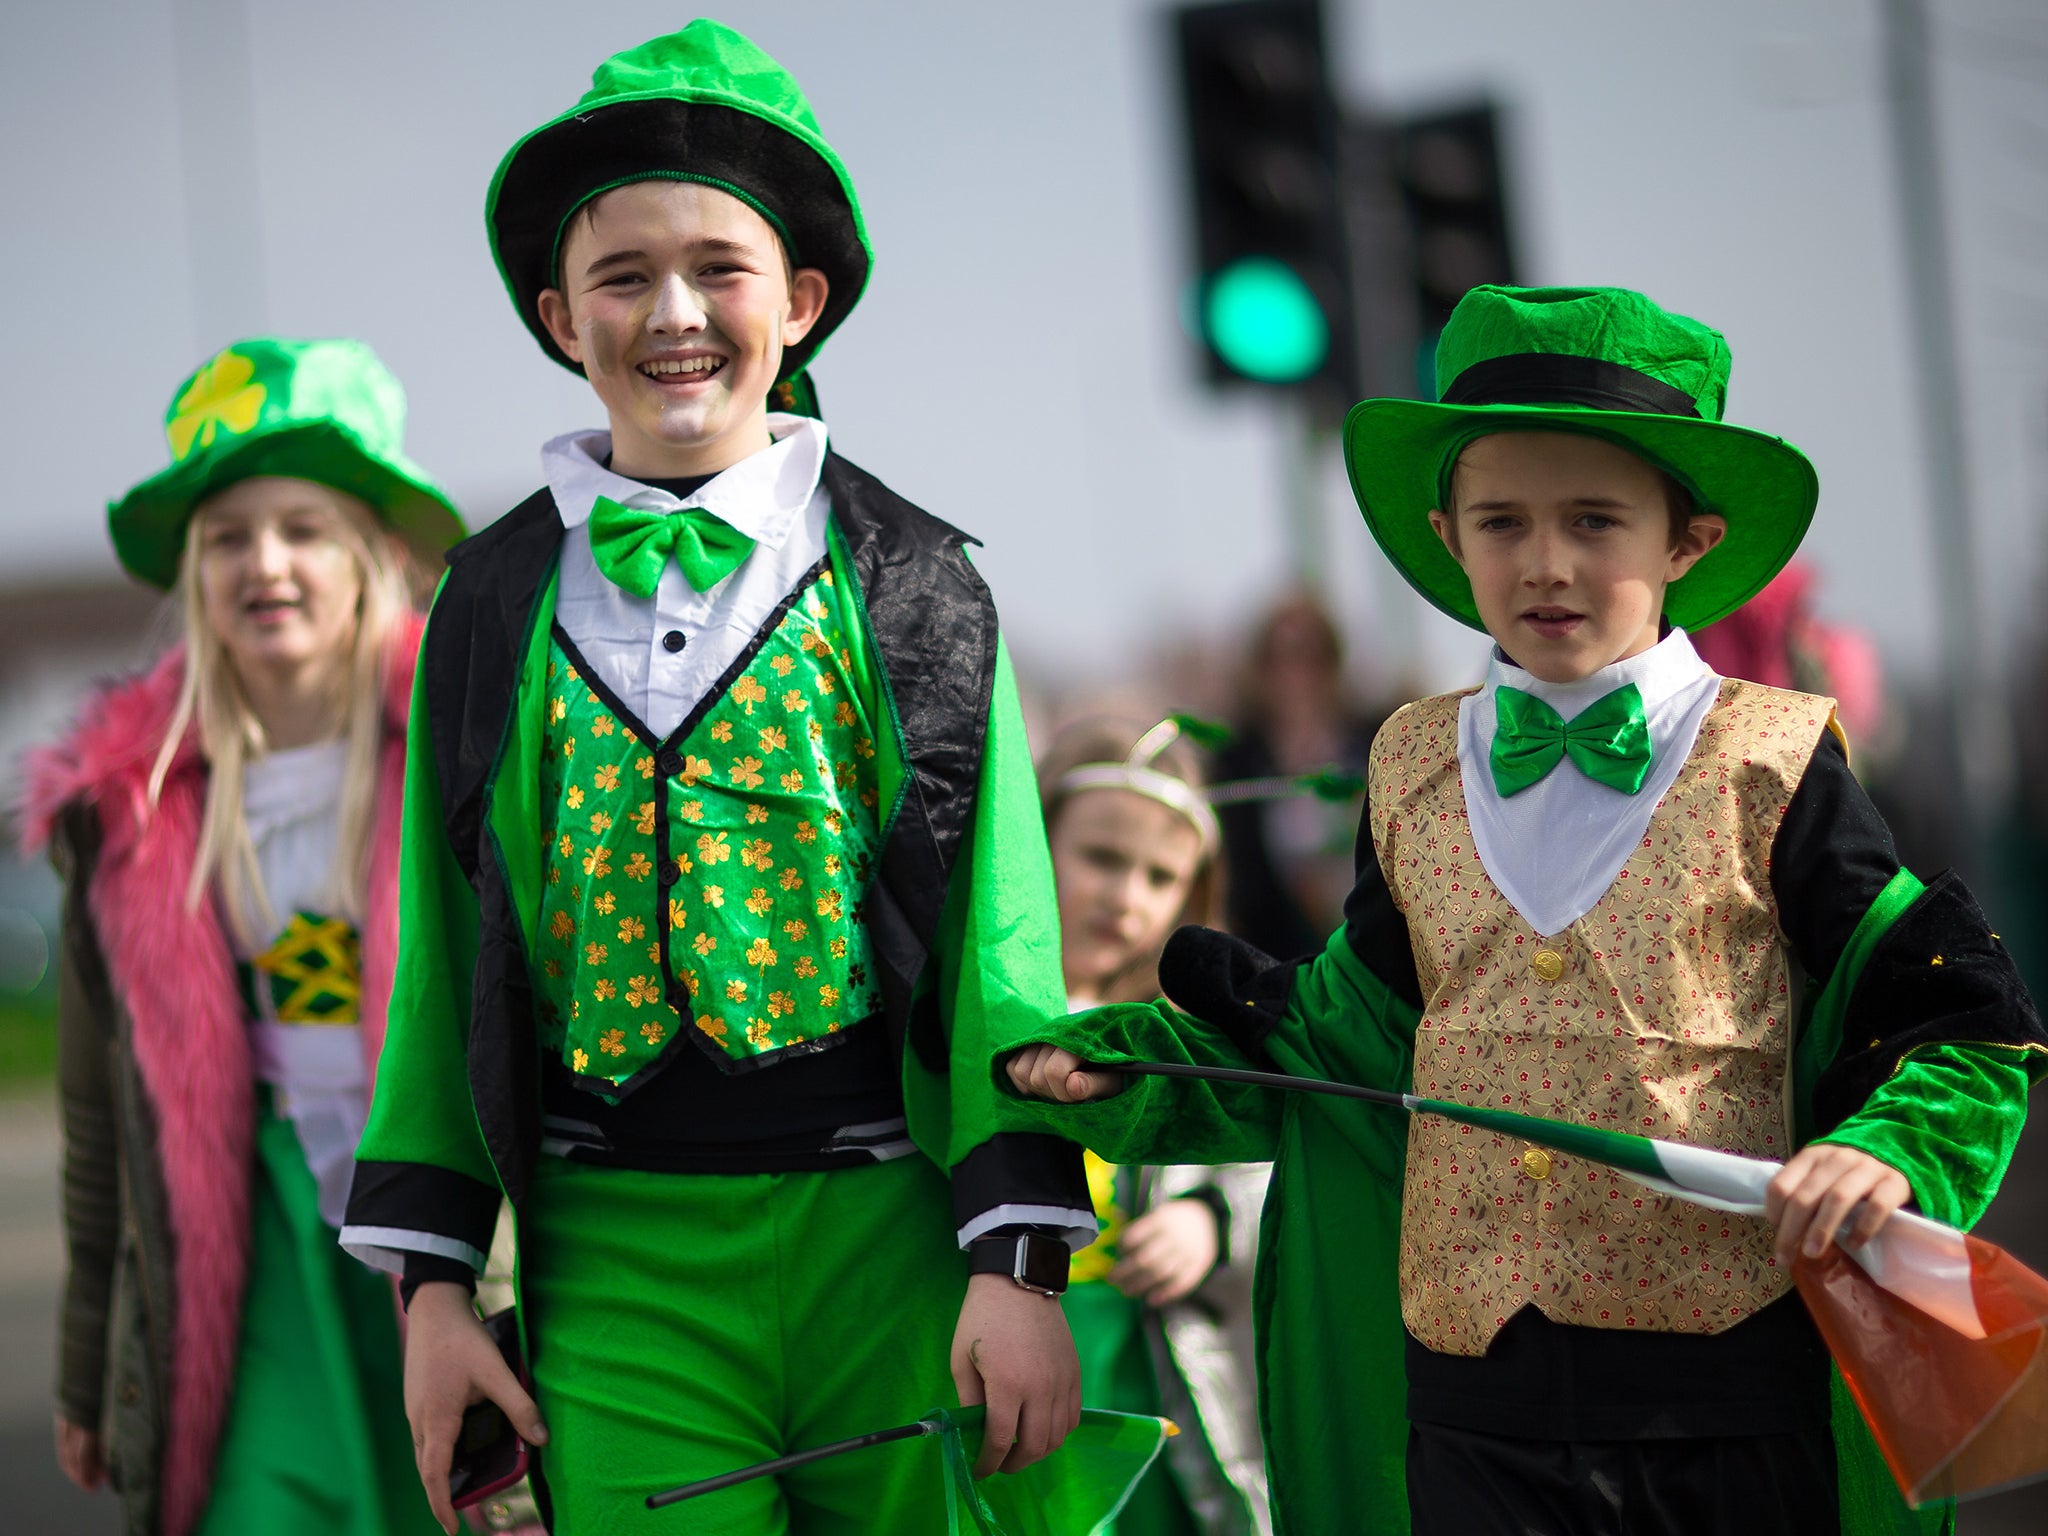 The first St Patrick’s Day parade was held in Boston in 1737, the result of Irish immigrants celebrating their home country, culture and pride in their heritage,